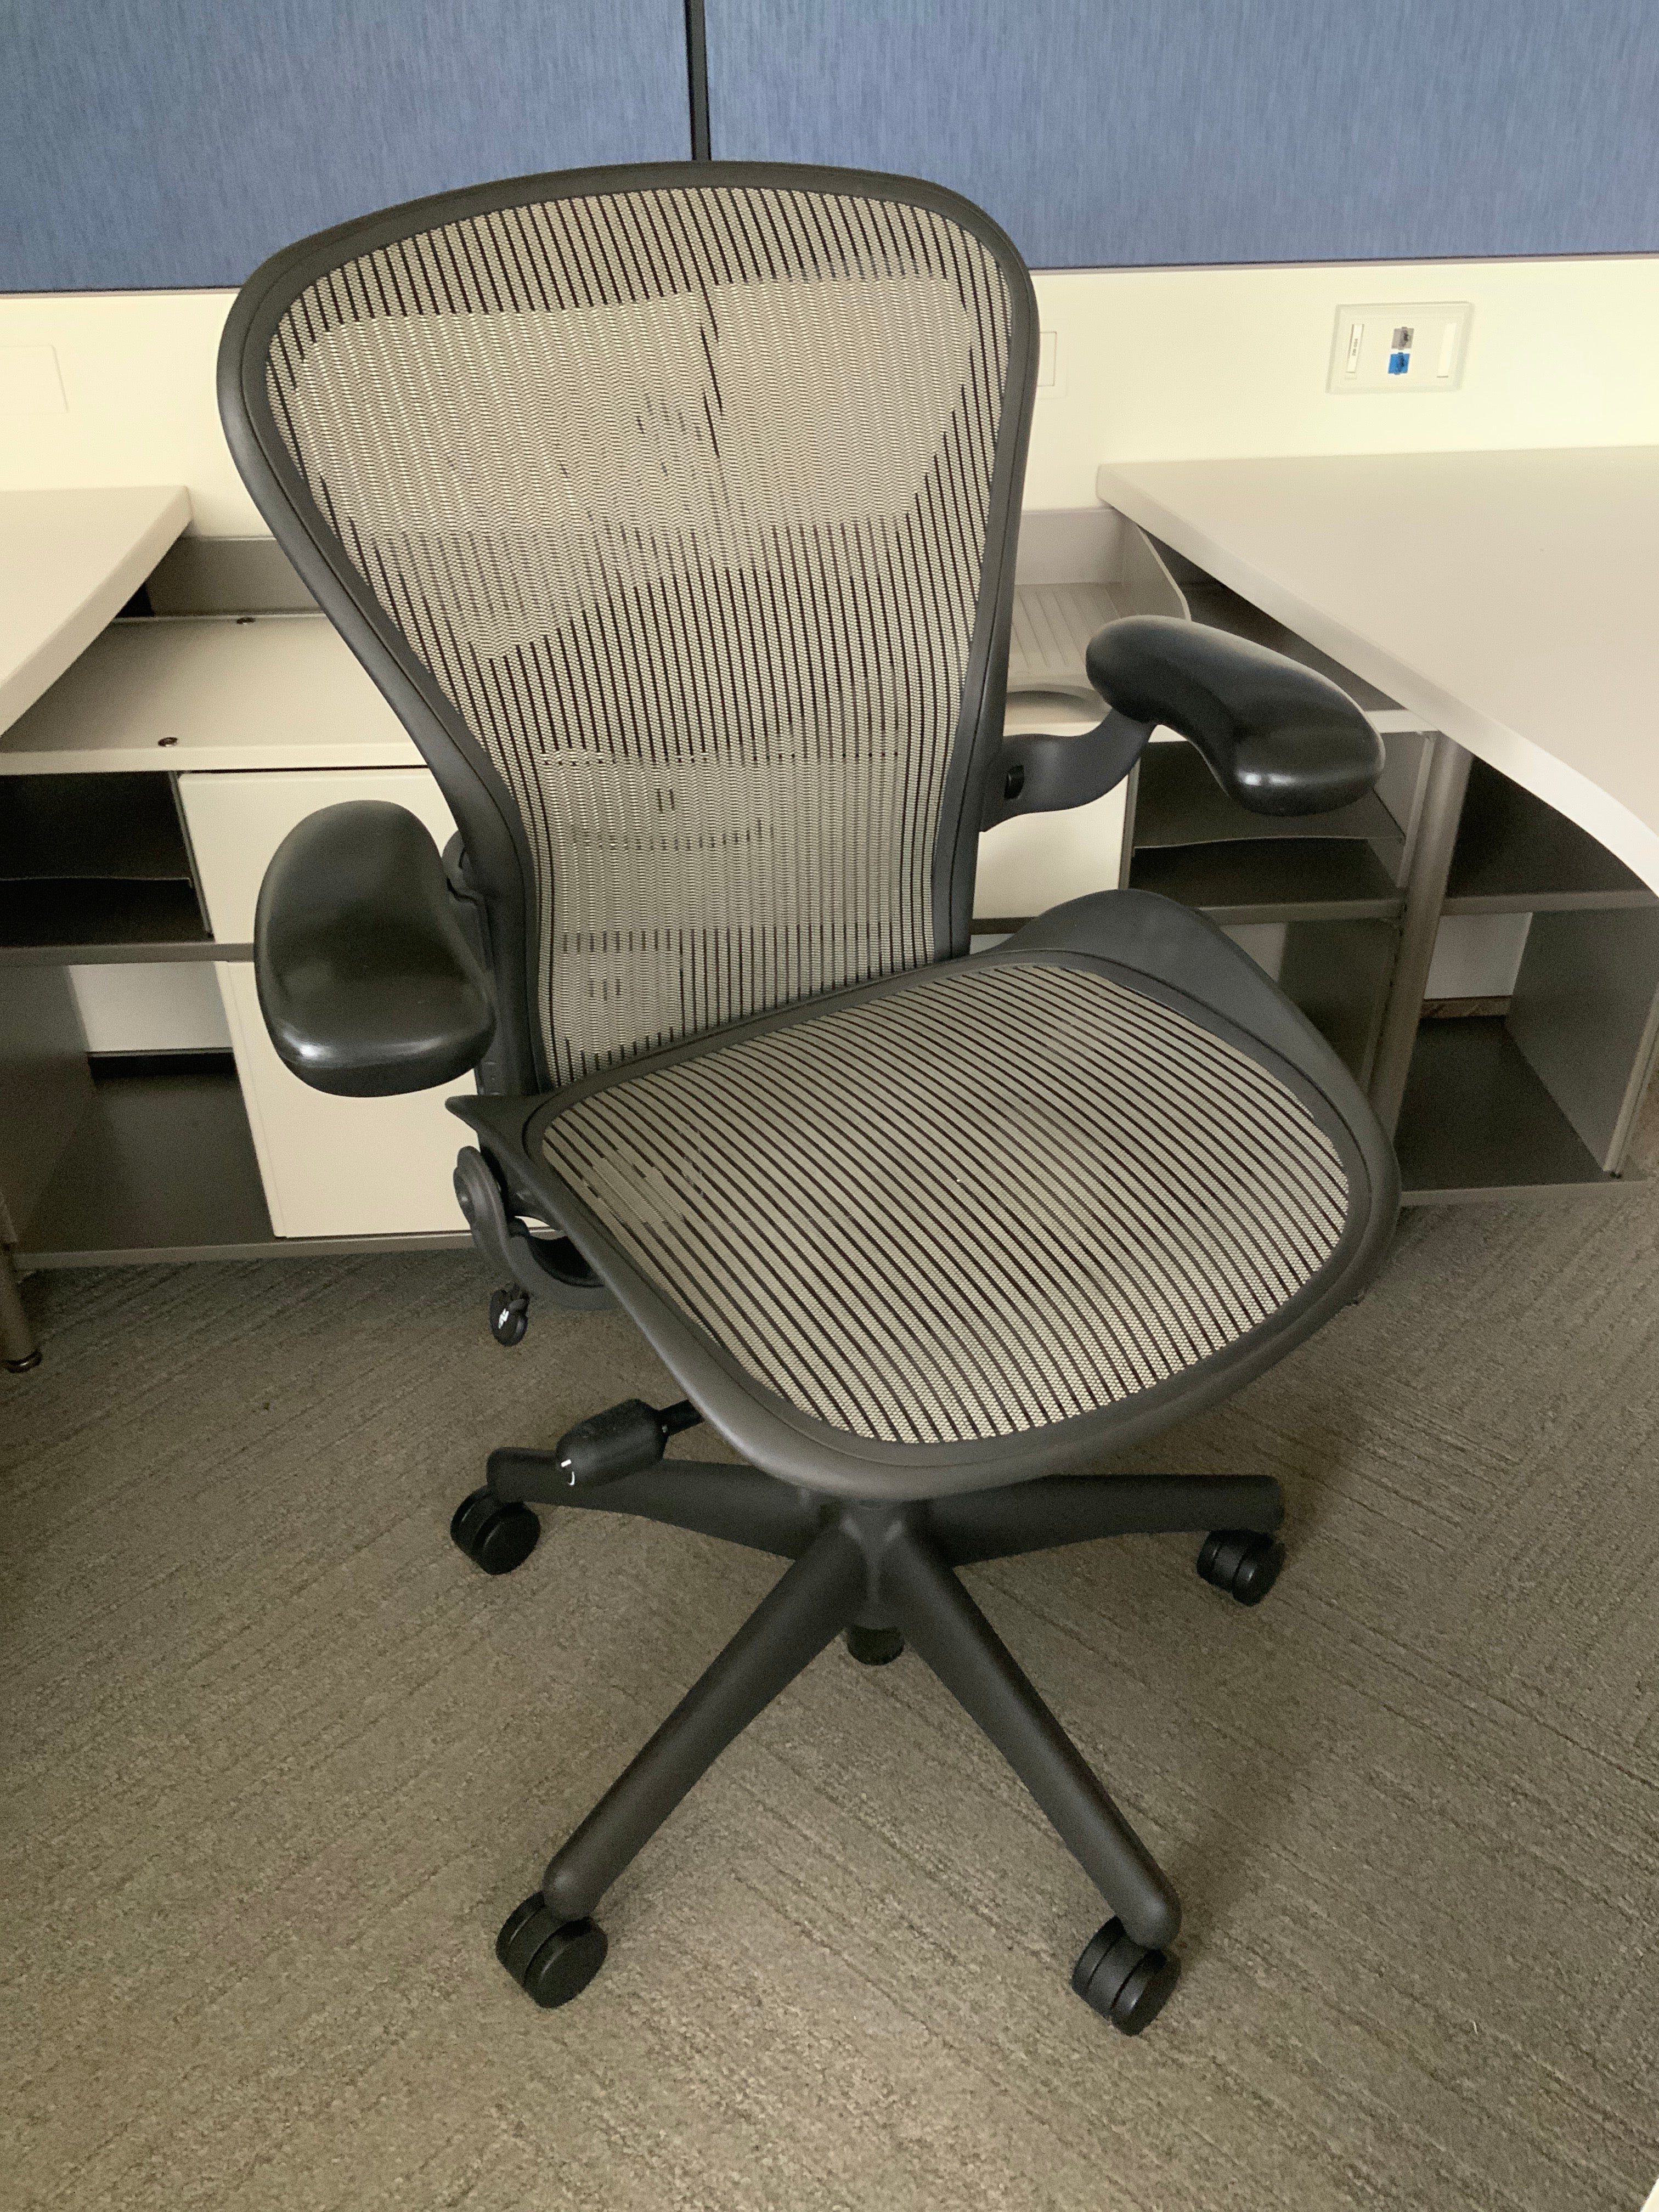 Herman Miller Grey Aeron Task Chair Size C - Preowned - FOB Vernon Hills, IL (Min Purchase Qty = 20)